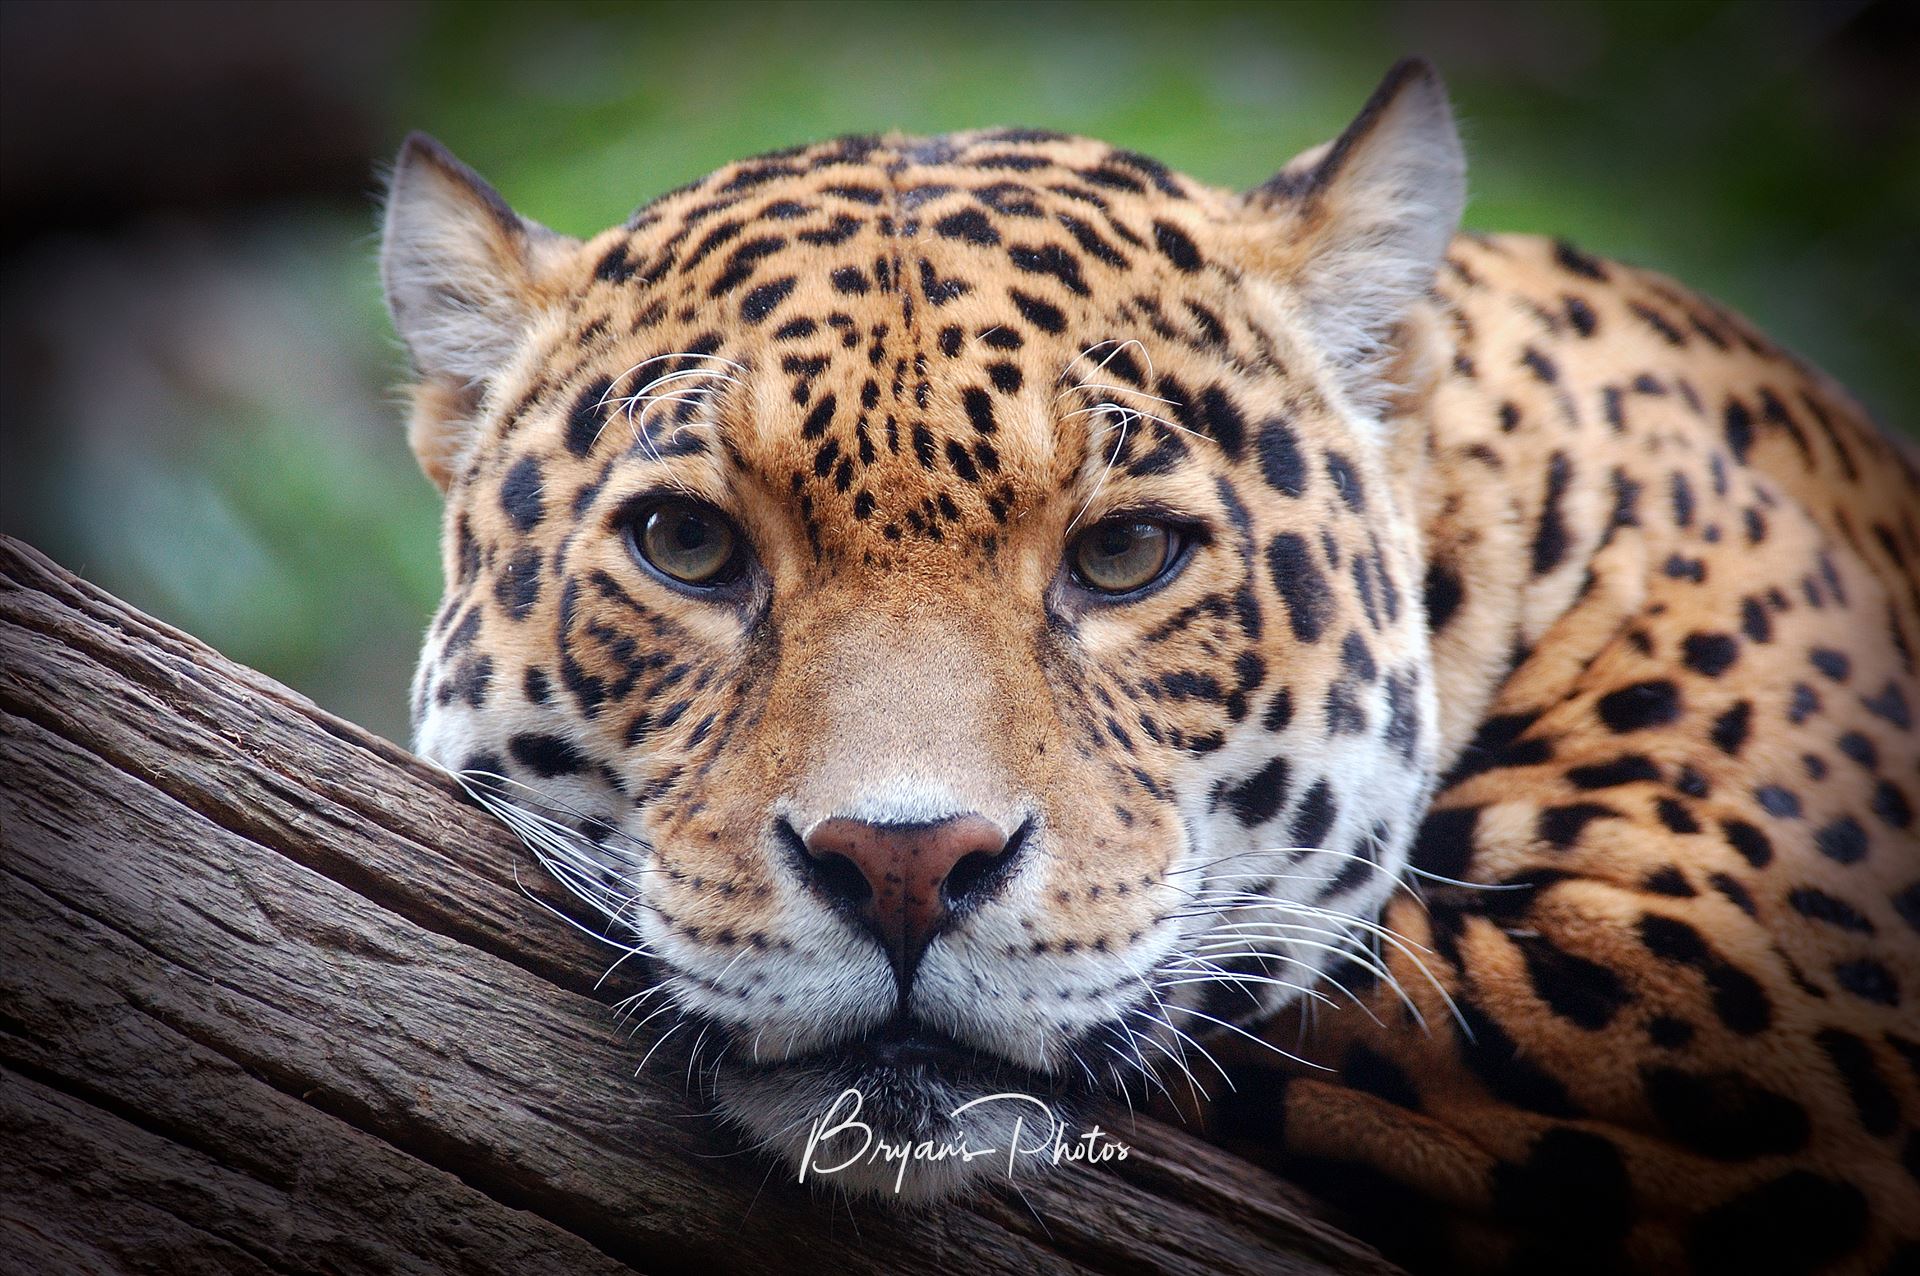 Jaguar Stare 2 Photograph of a Jaguar staring straight at me. by Bryans Photos